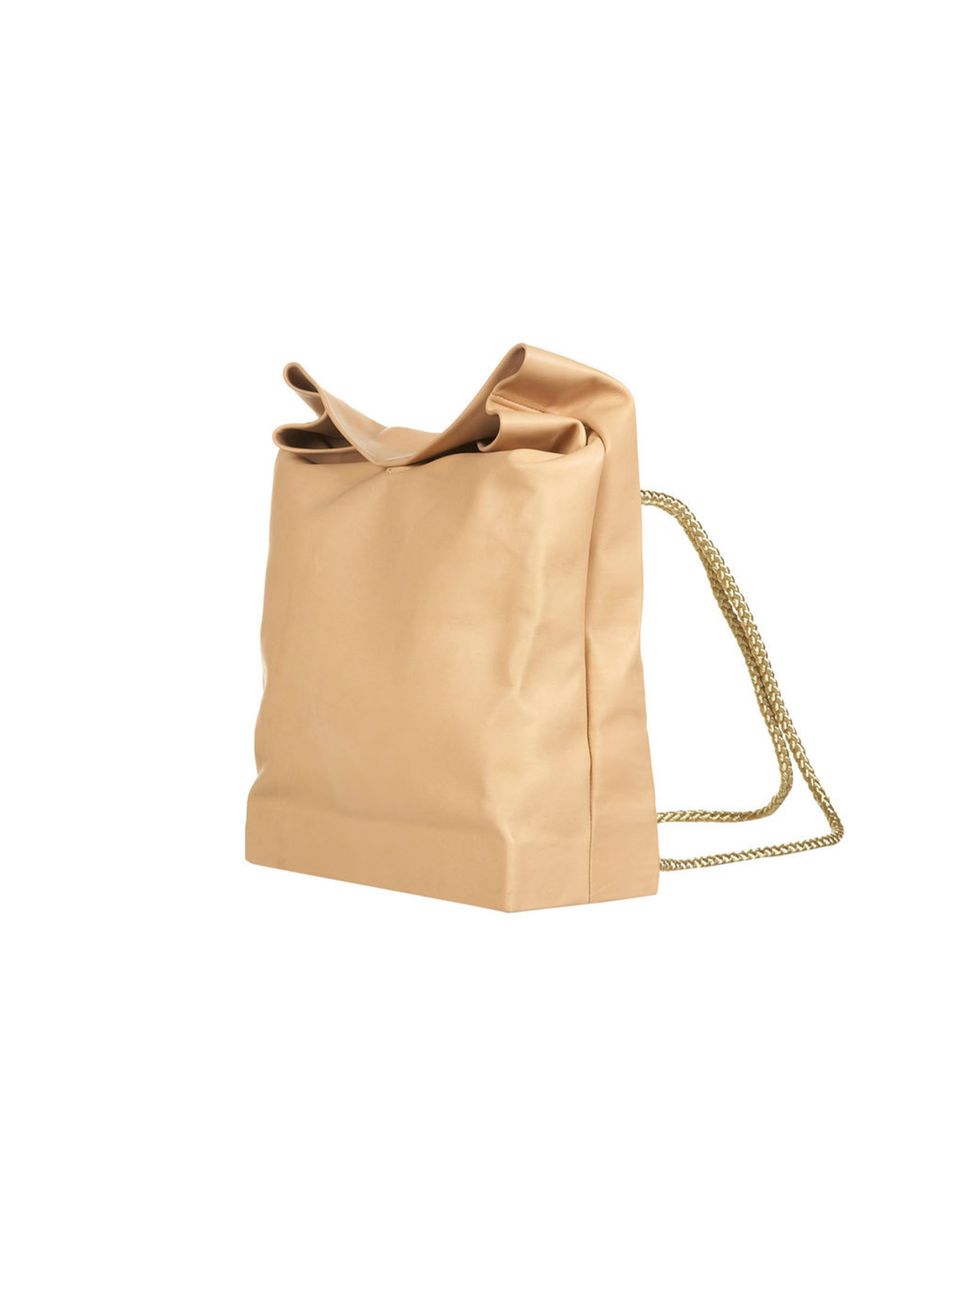 <p>Two words: seriously cool. This leather rucksack is far more covetable than any other weve seen so far this season Topshop Unique leathe rucksack, £180</p><p><a href="http://shopping.elleuk.com/browse?fts=topshop+unique+rucksack">BUY NOW</a></p>